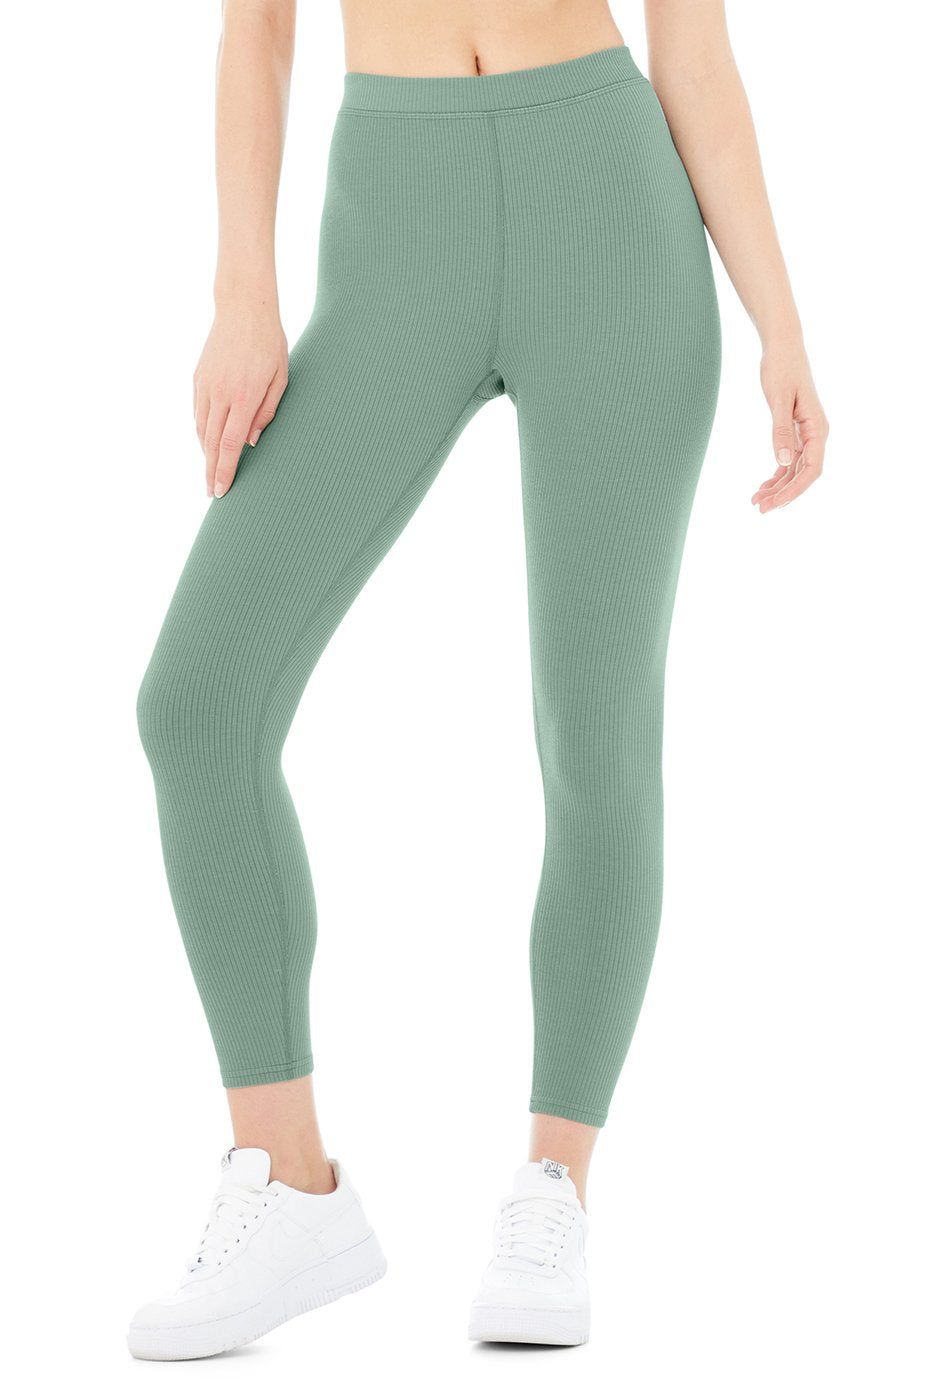 Alo Yoga 20% off (But larger percentages on certain colors, really good  deals on sale) : r/frugalmalefashion